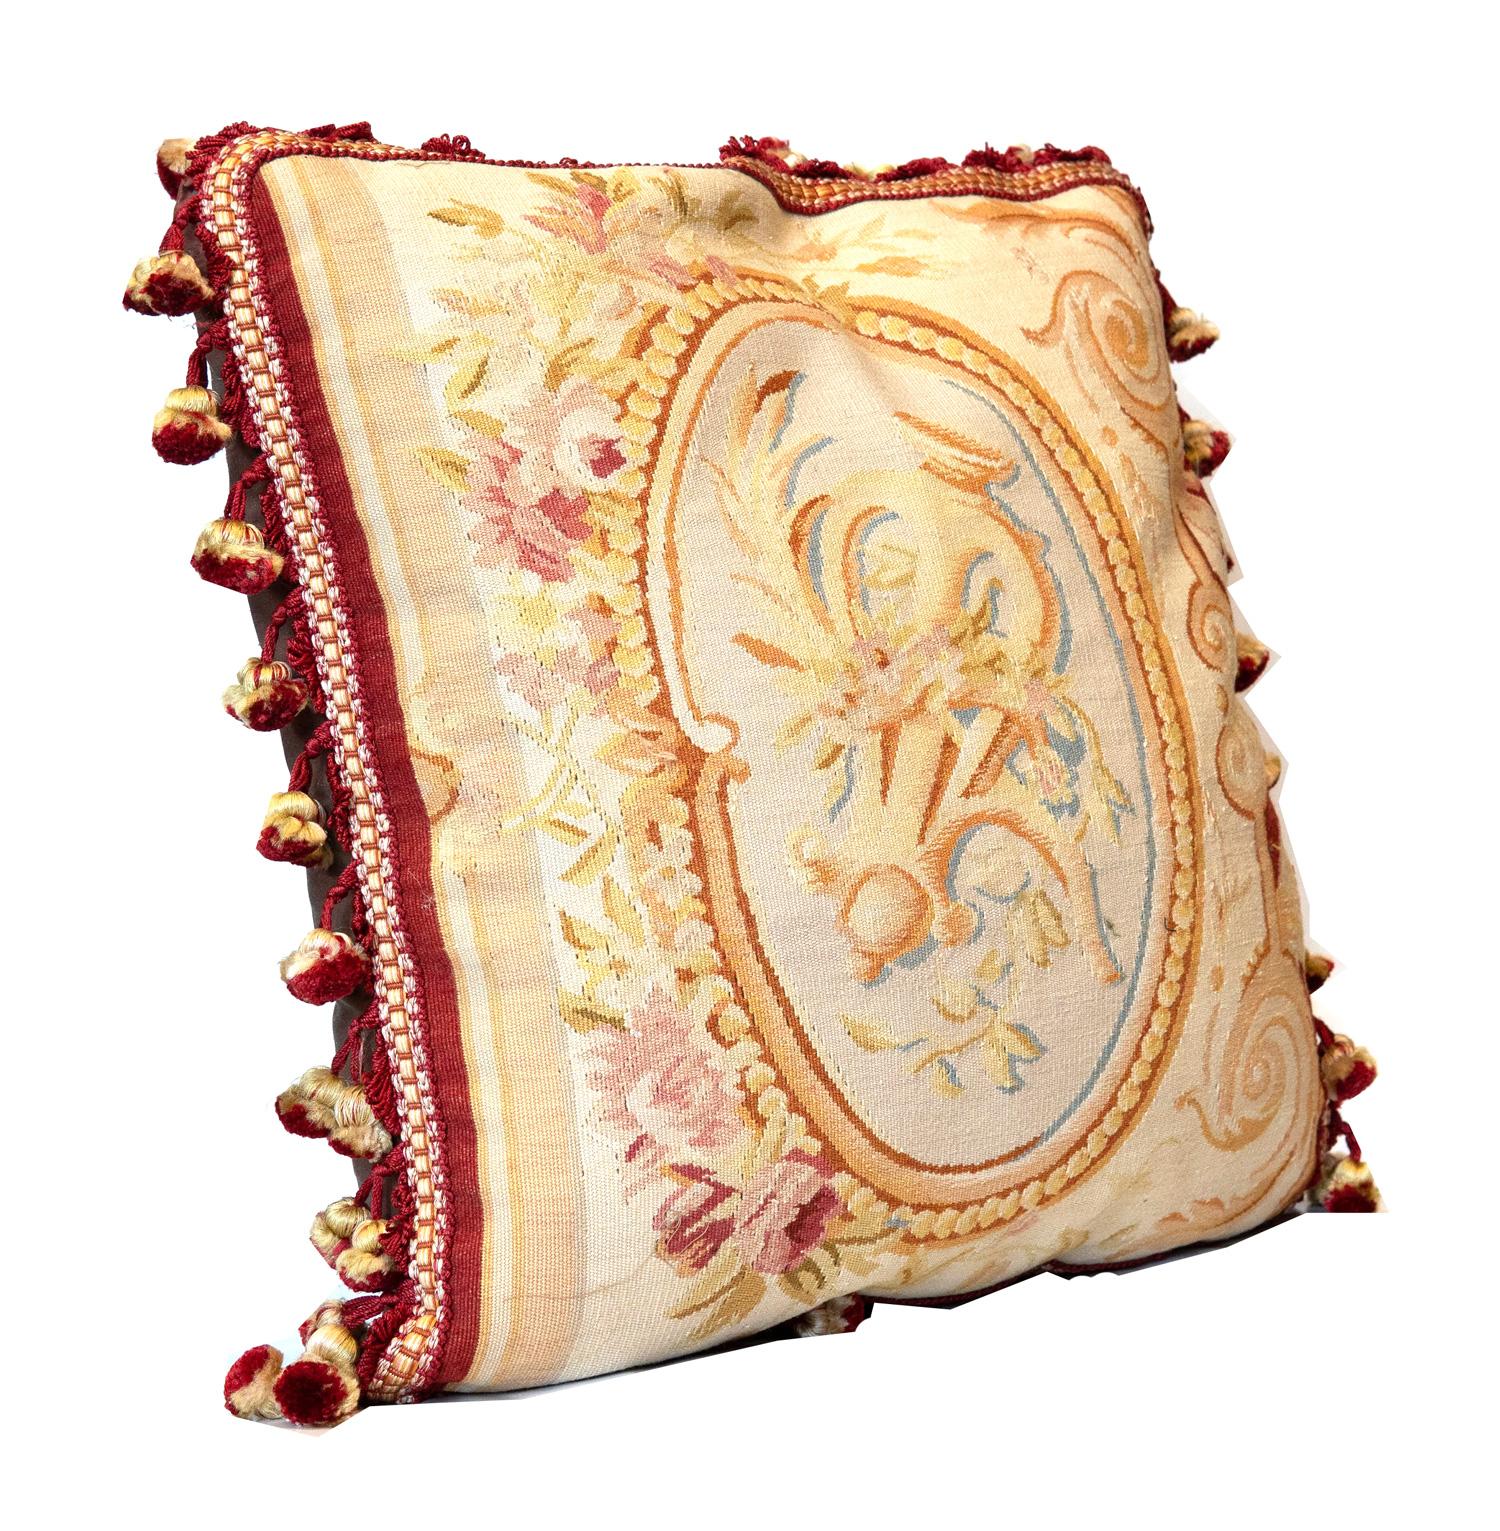 Antique rug vintage pillowcase zipper cushion handmade Aubusson pillow cover, view one of the most comprehensive collections of the decorative pillow, handmade throw pillow cover of traditional French Aubusson rugs, wool and silk cushions cover with